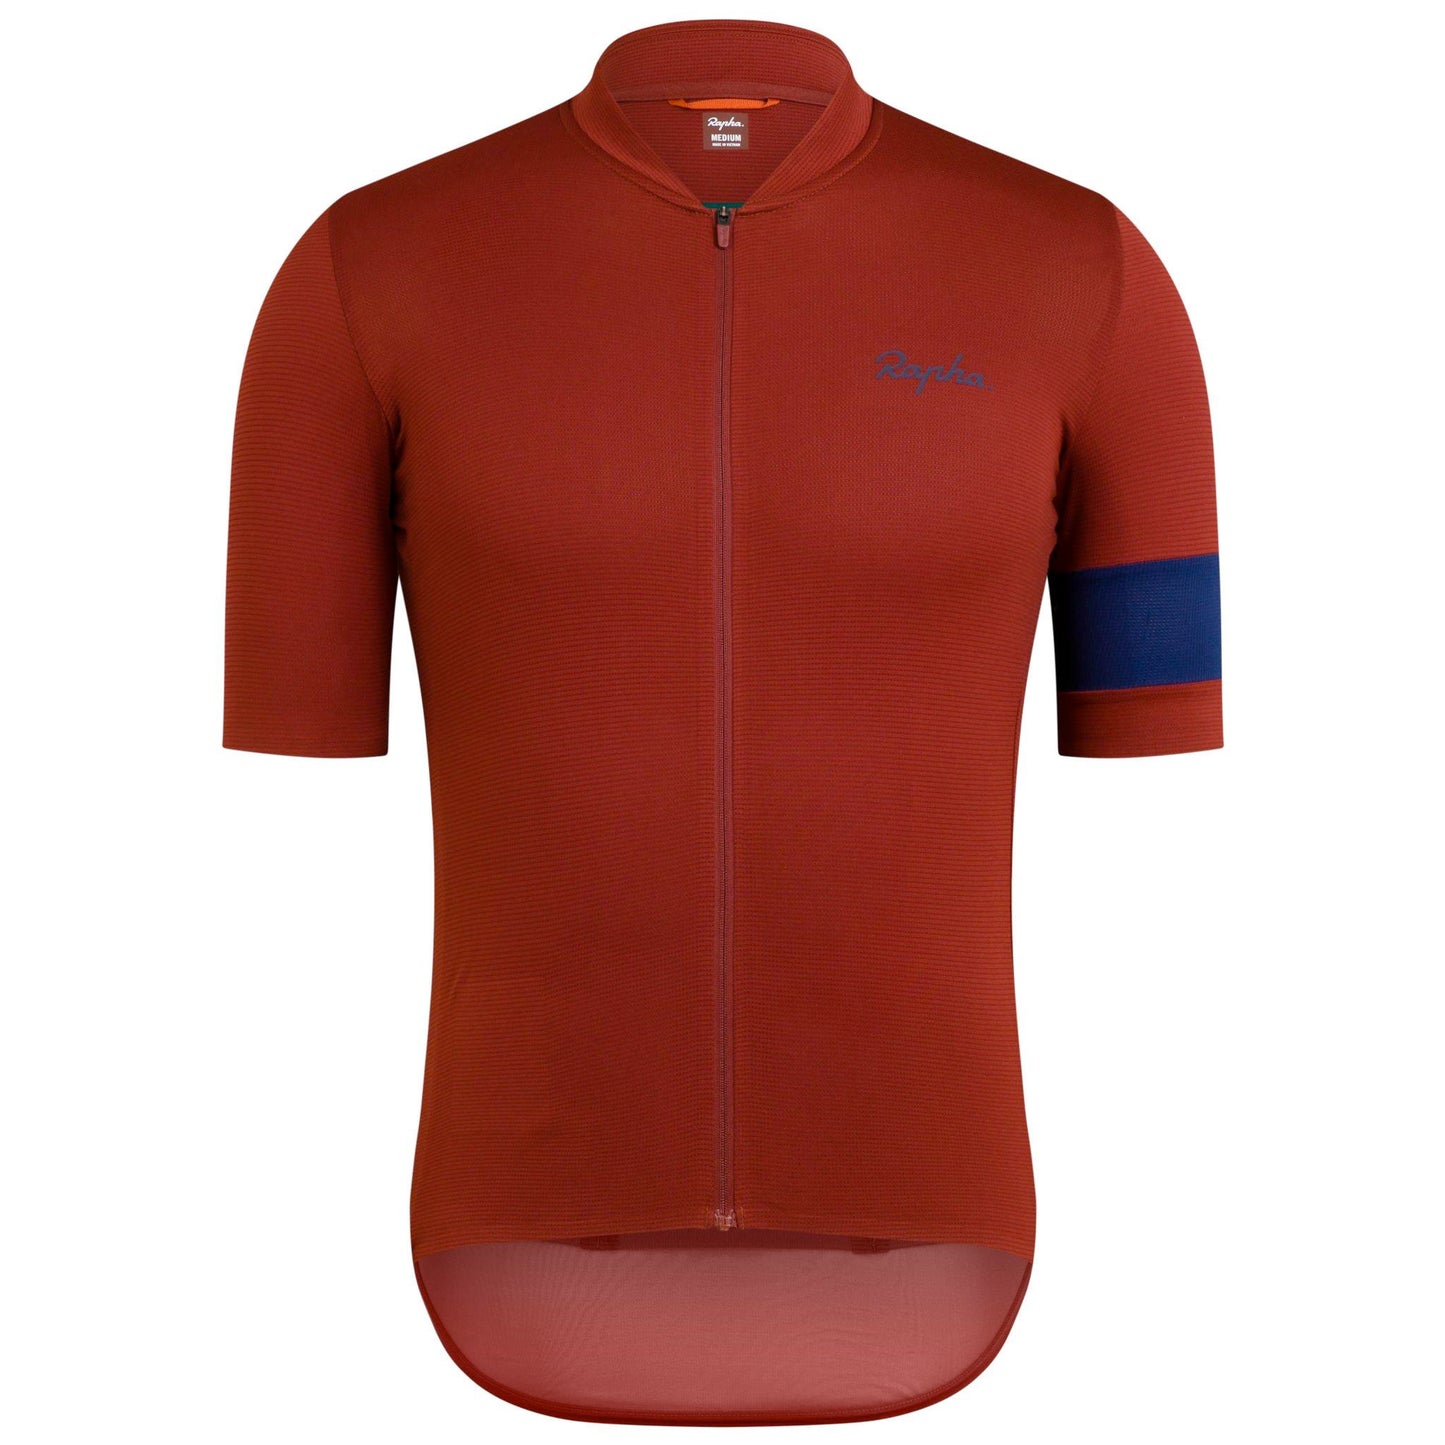 Rapha Mens Classic Flyweight Jersey, Brick buy online at Woolys Wheels with free delivery